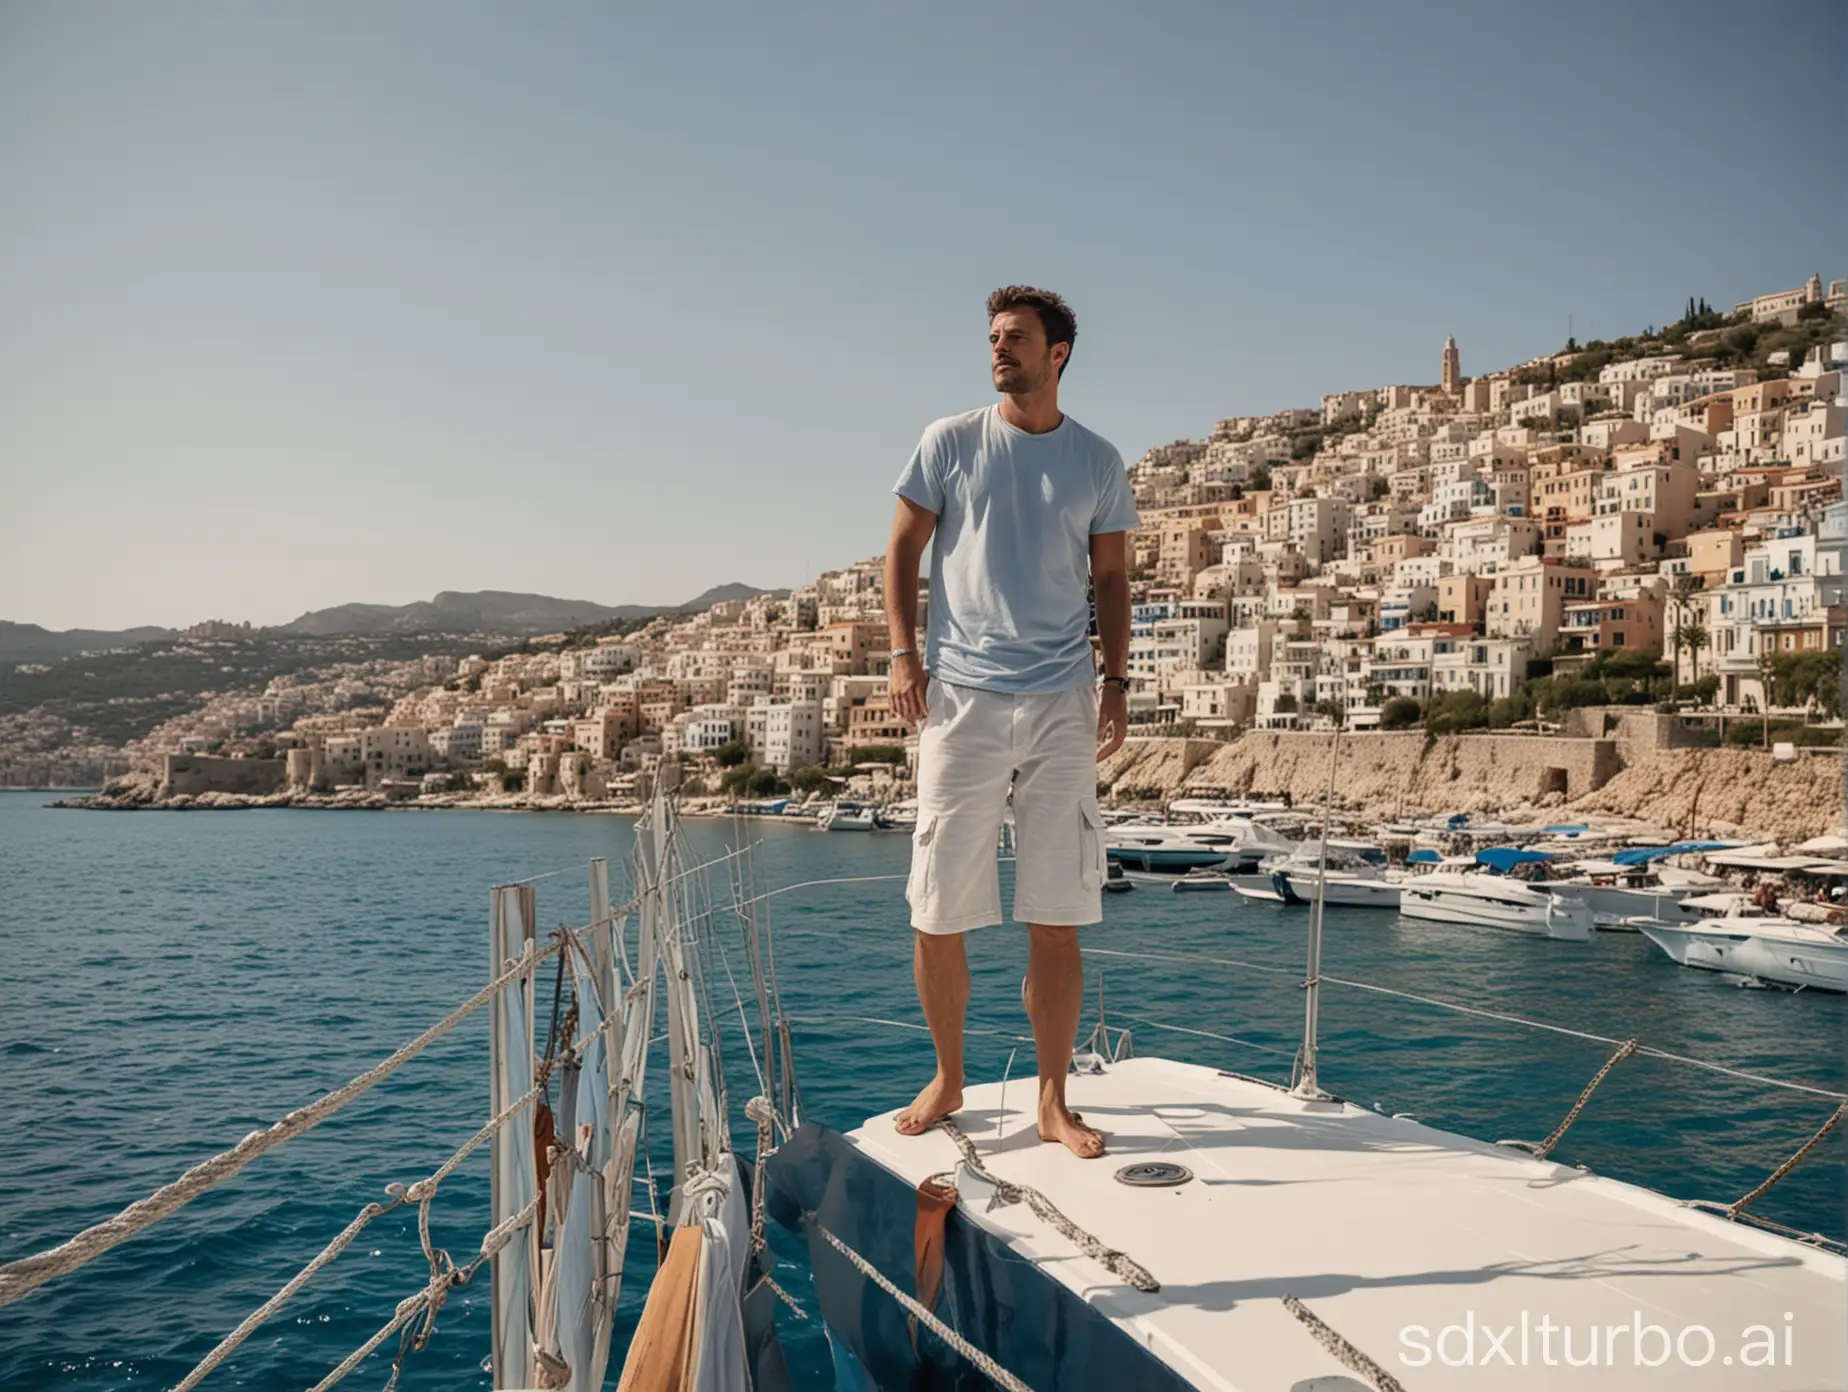 a man stands on the edge of a yacht, looks to the side, blue sea, behind the Mediterranean city, day